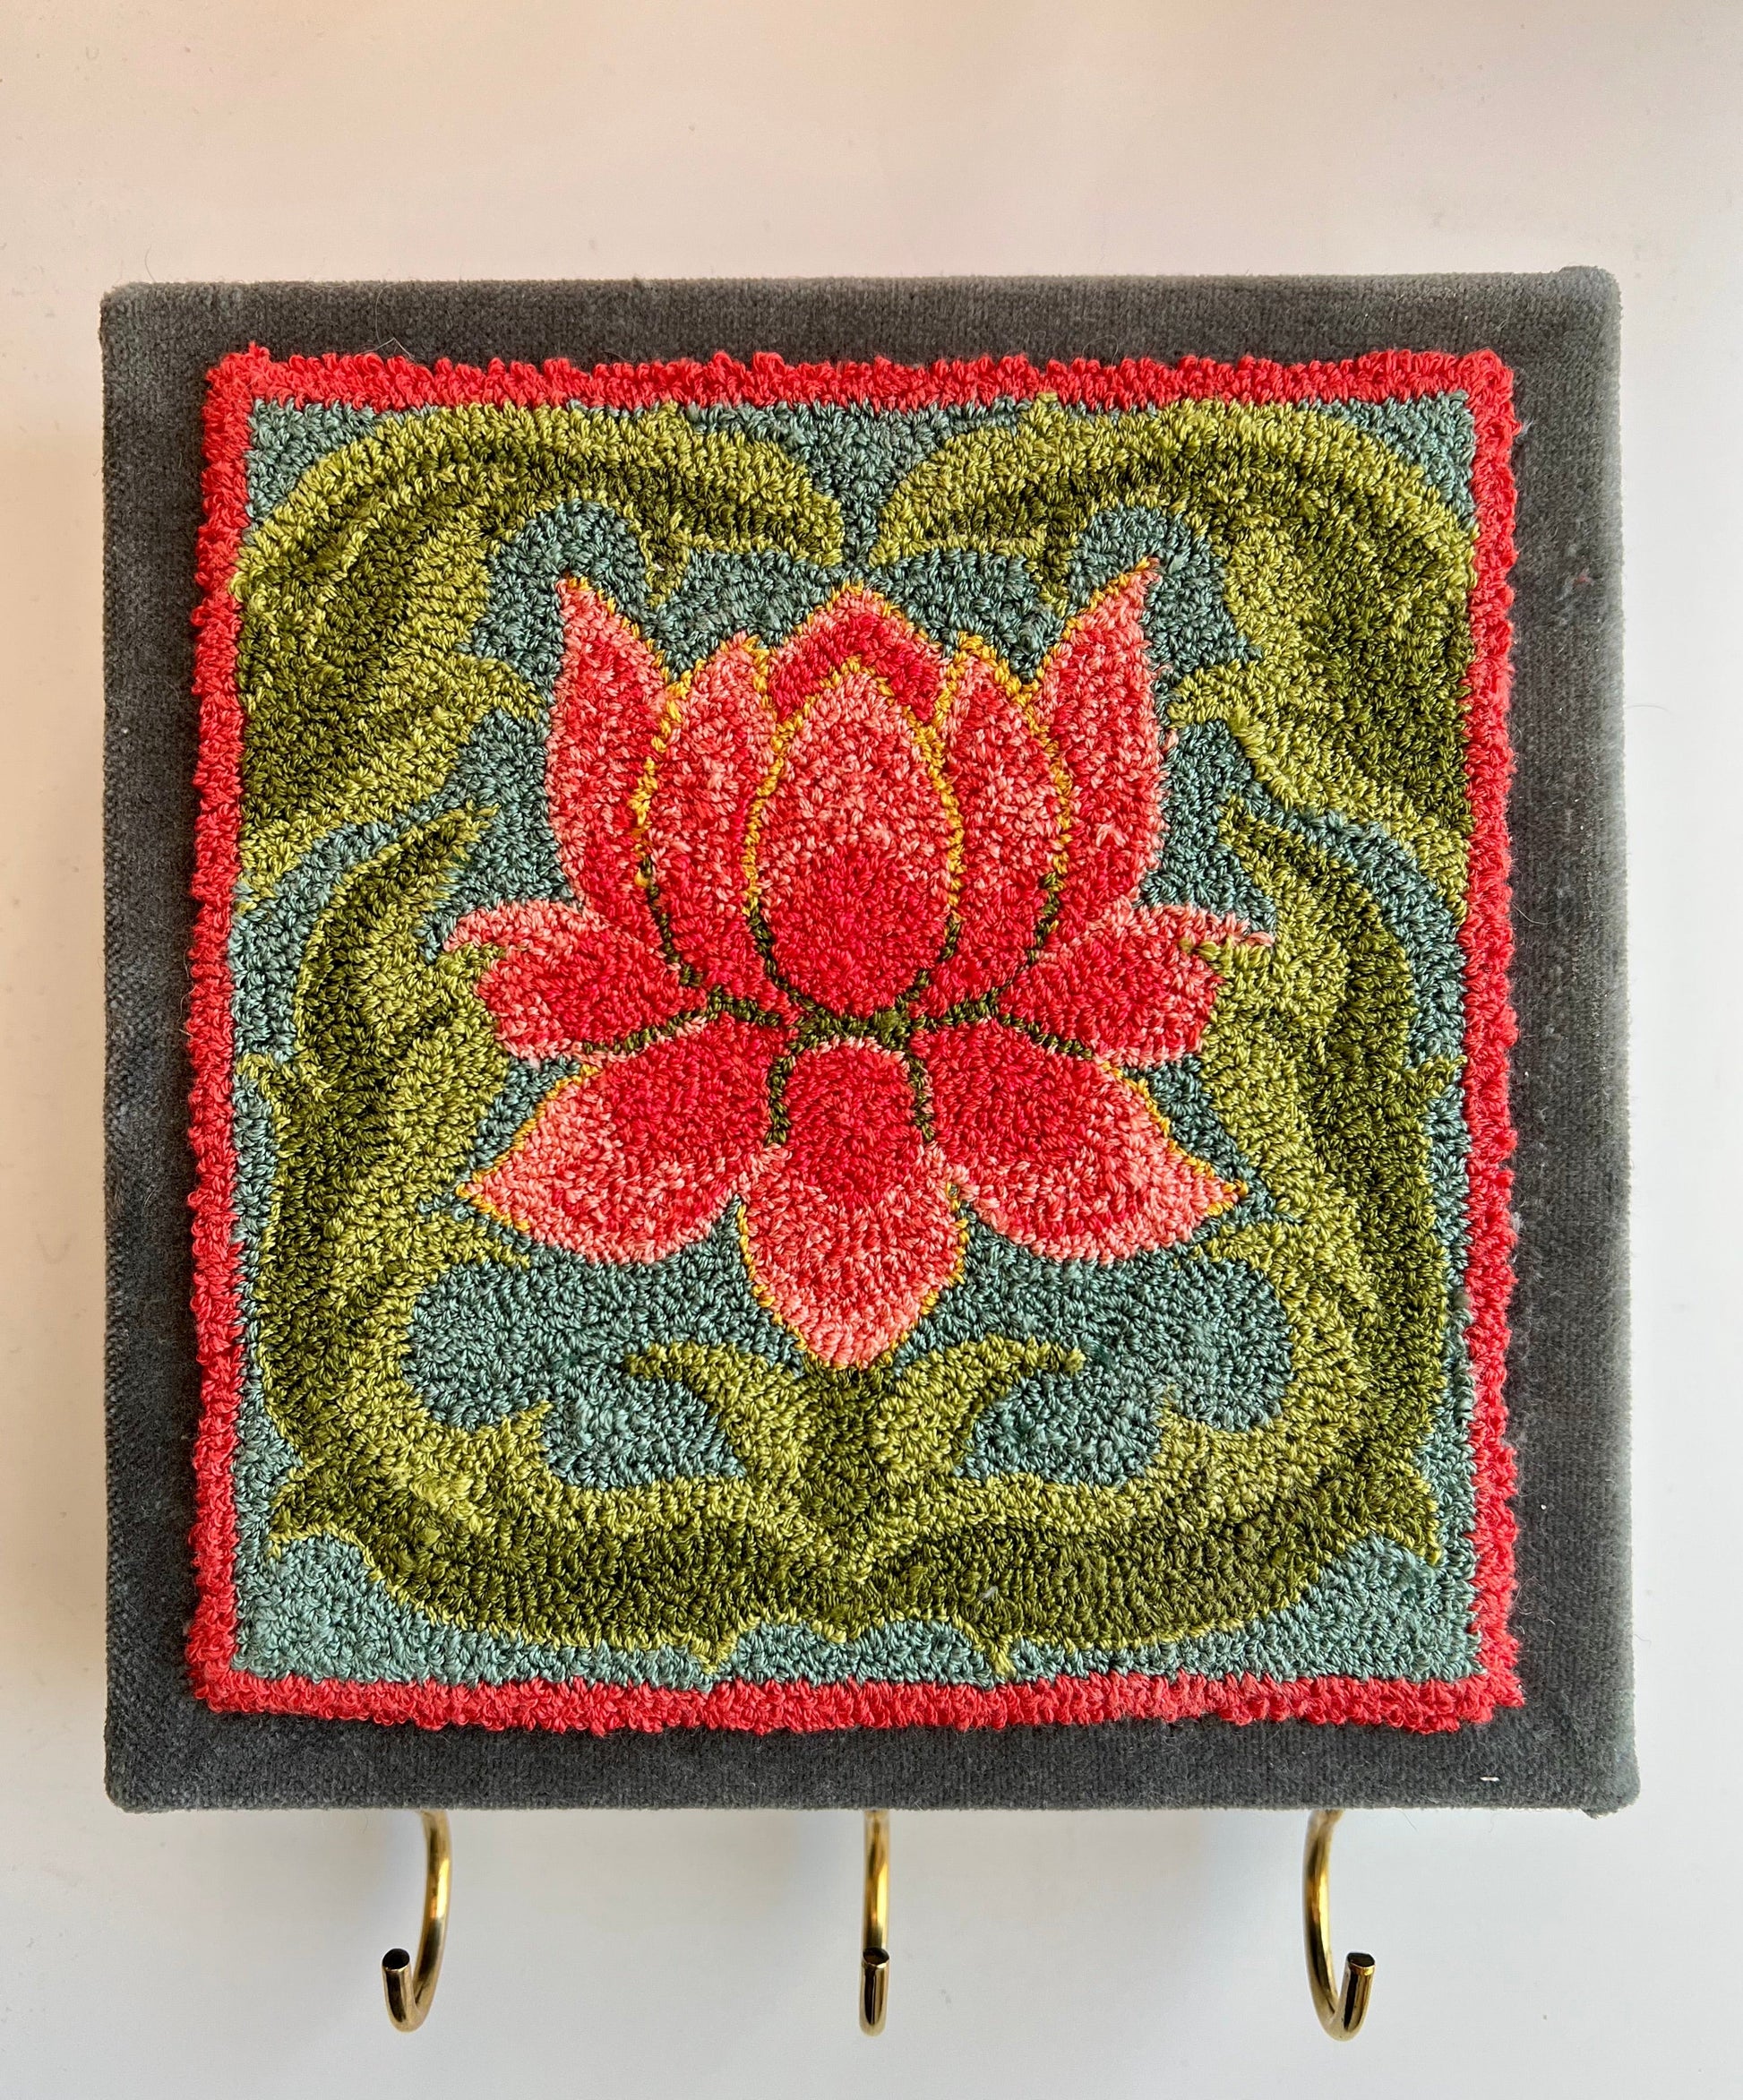 Blooming Punch Needle Pattern by Orphaned Wool. This wonderful design makes a lovely frame design or as shown as a perfect key or jewelry hanger. This design is perfect for the beginner or experienced punch needle artist. Blooming Copyright 2023 Kelly Kanyok/Orphaned Wool